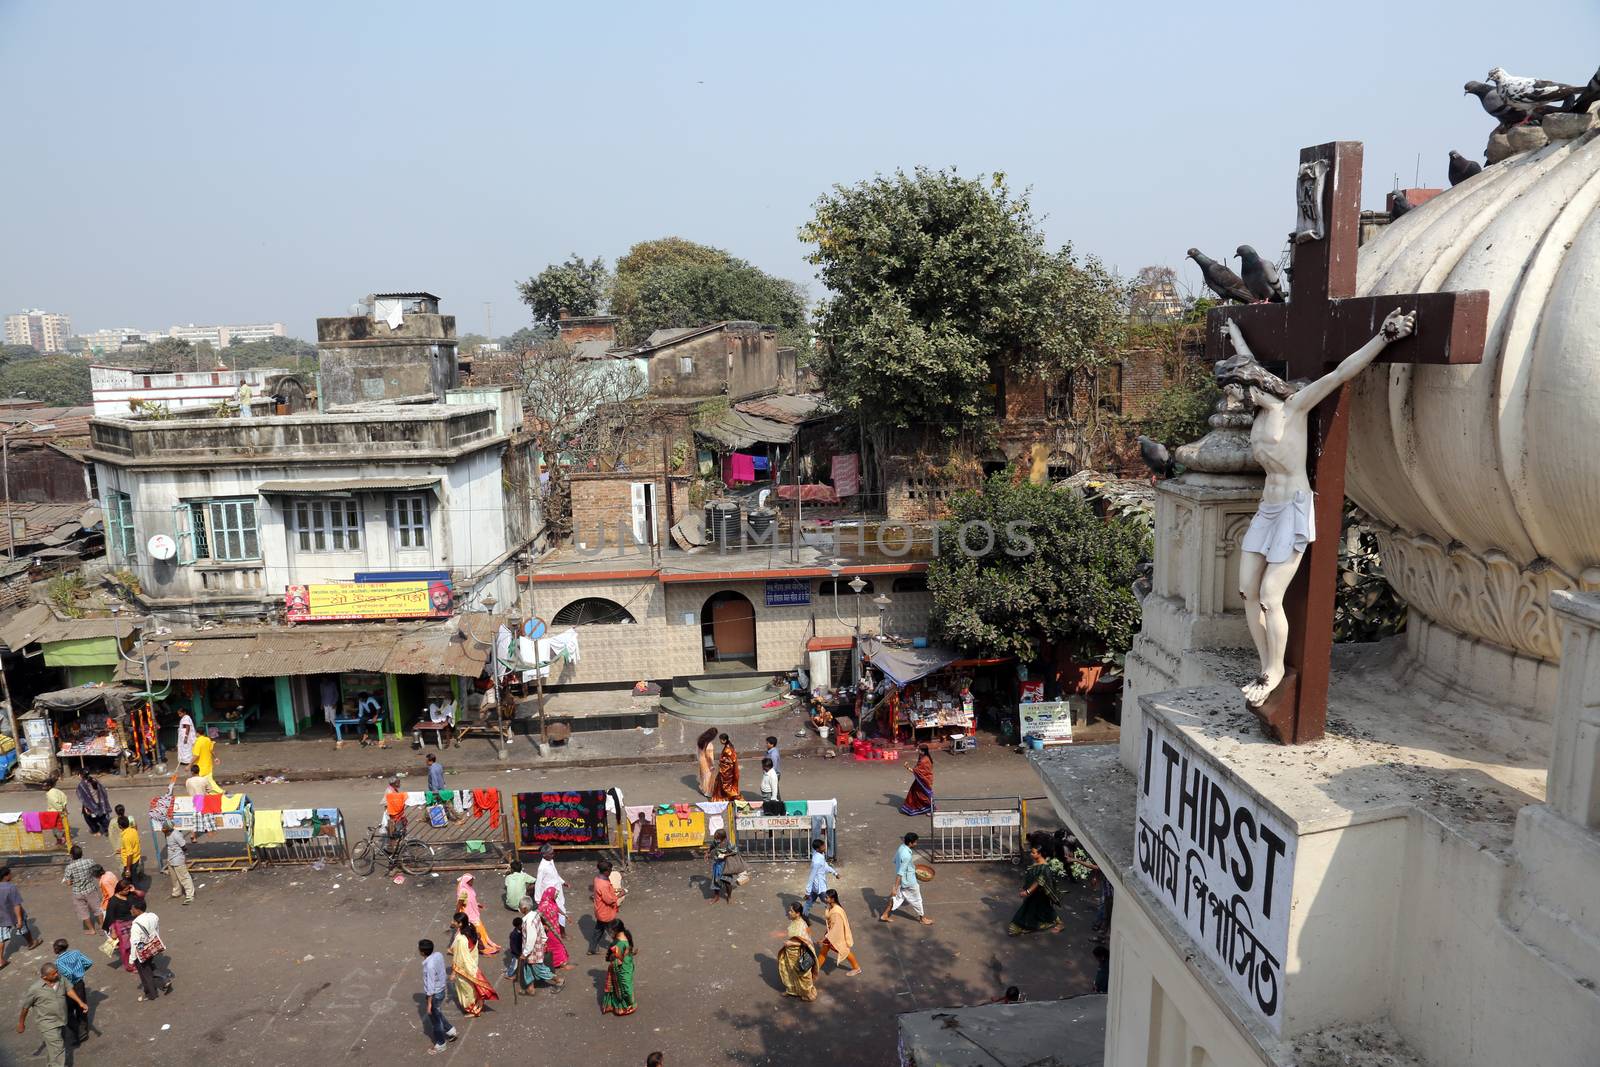 Crucifix on top of the Nirmal Hriday, Home for the Sick and Dying Destitutes, one of the buildings established by the Mother Teresa and run by the Missionaries of Charity in Kolkata, India on February 10, 2014.